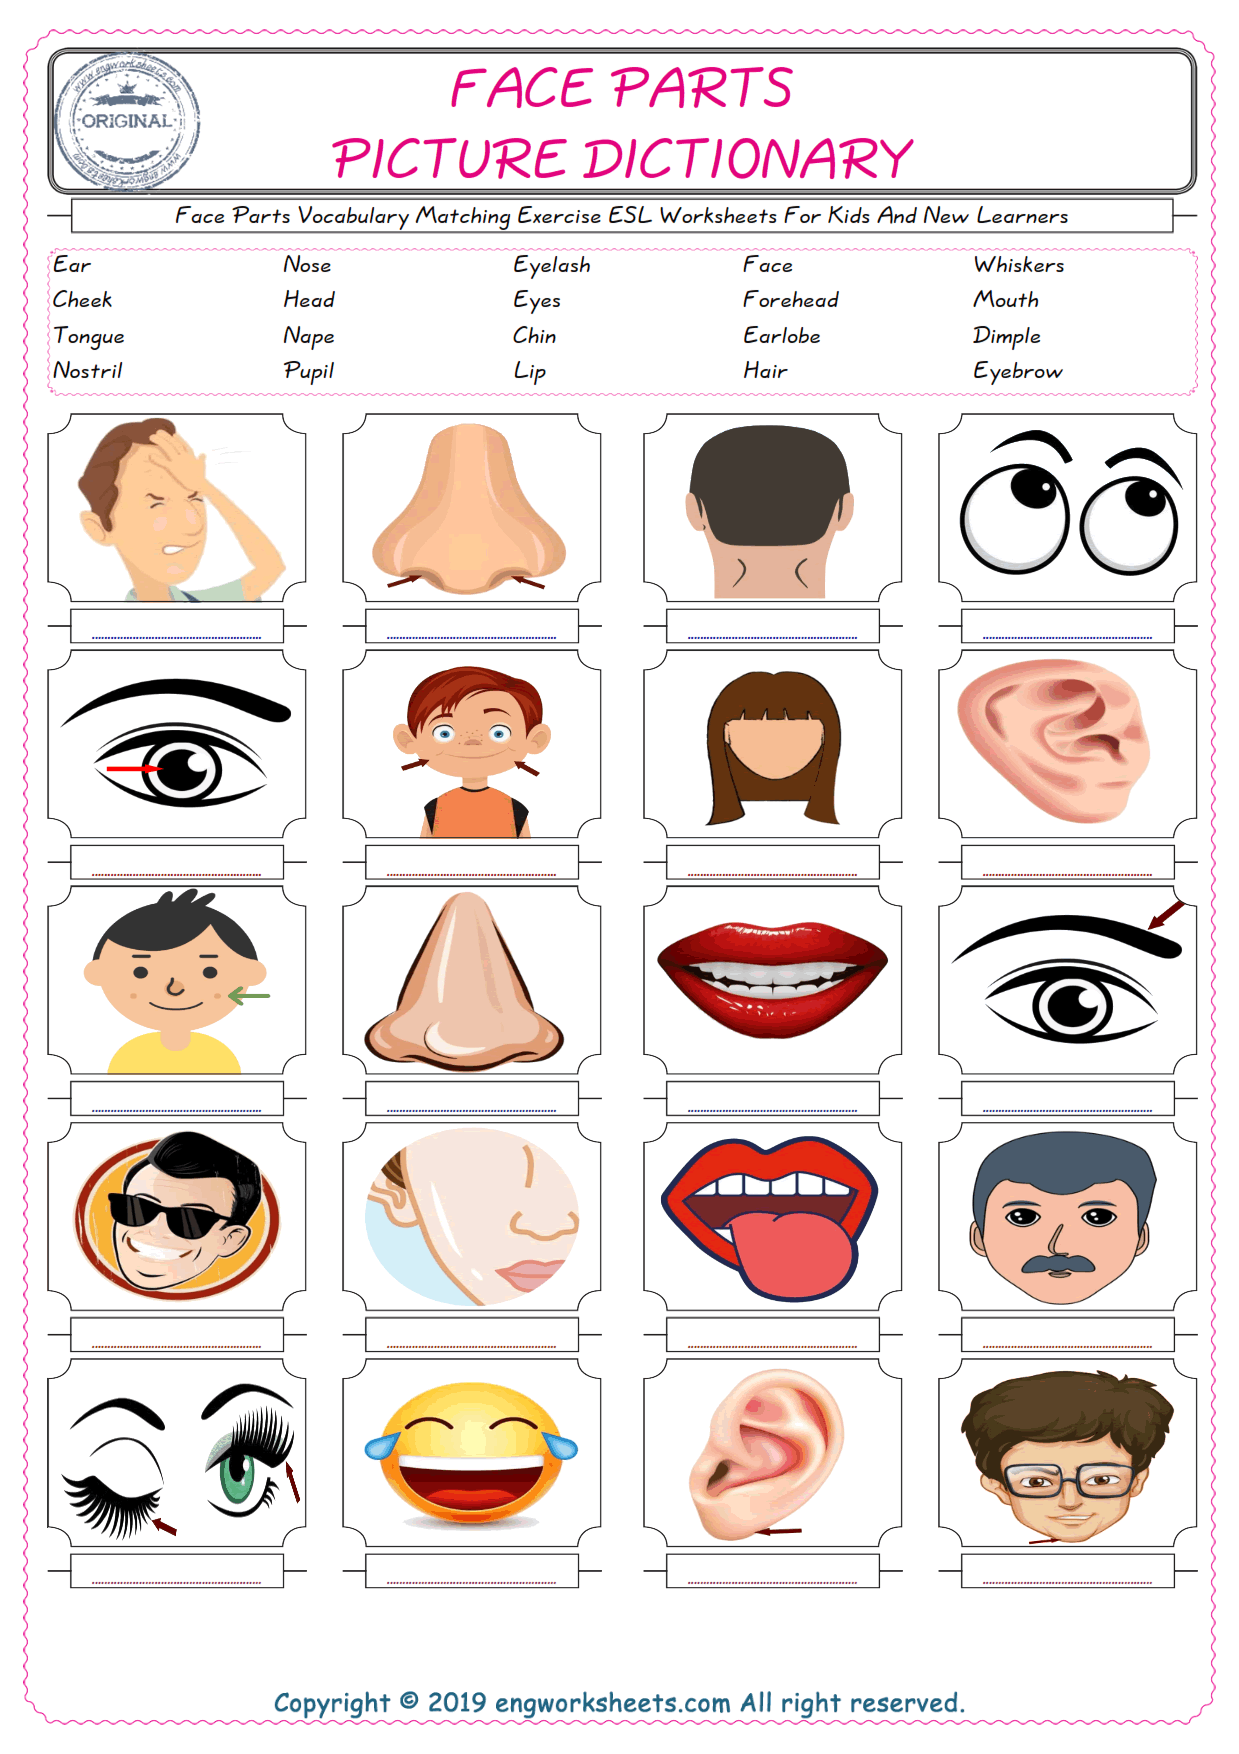  Face Parts for Kids ESL Word Matching English Exercise Worksheet. 